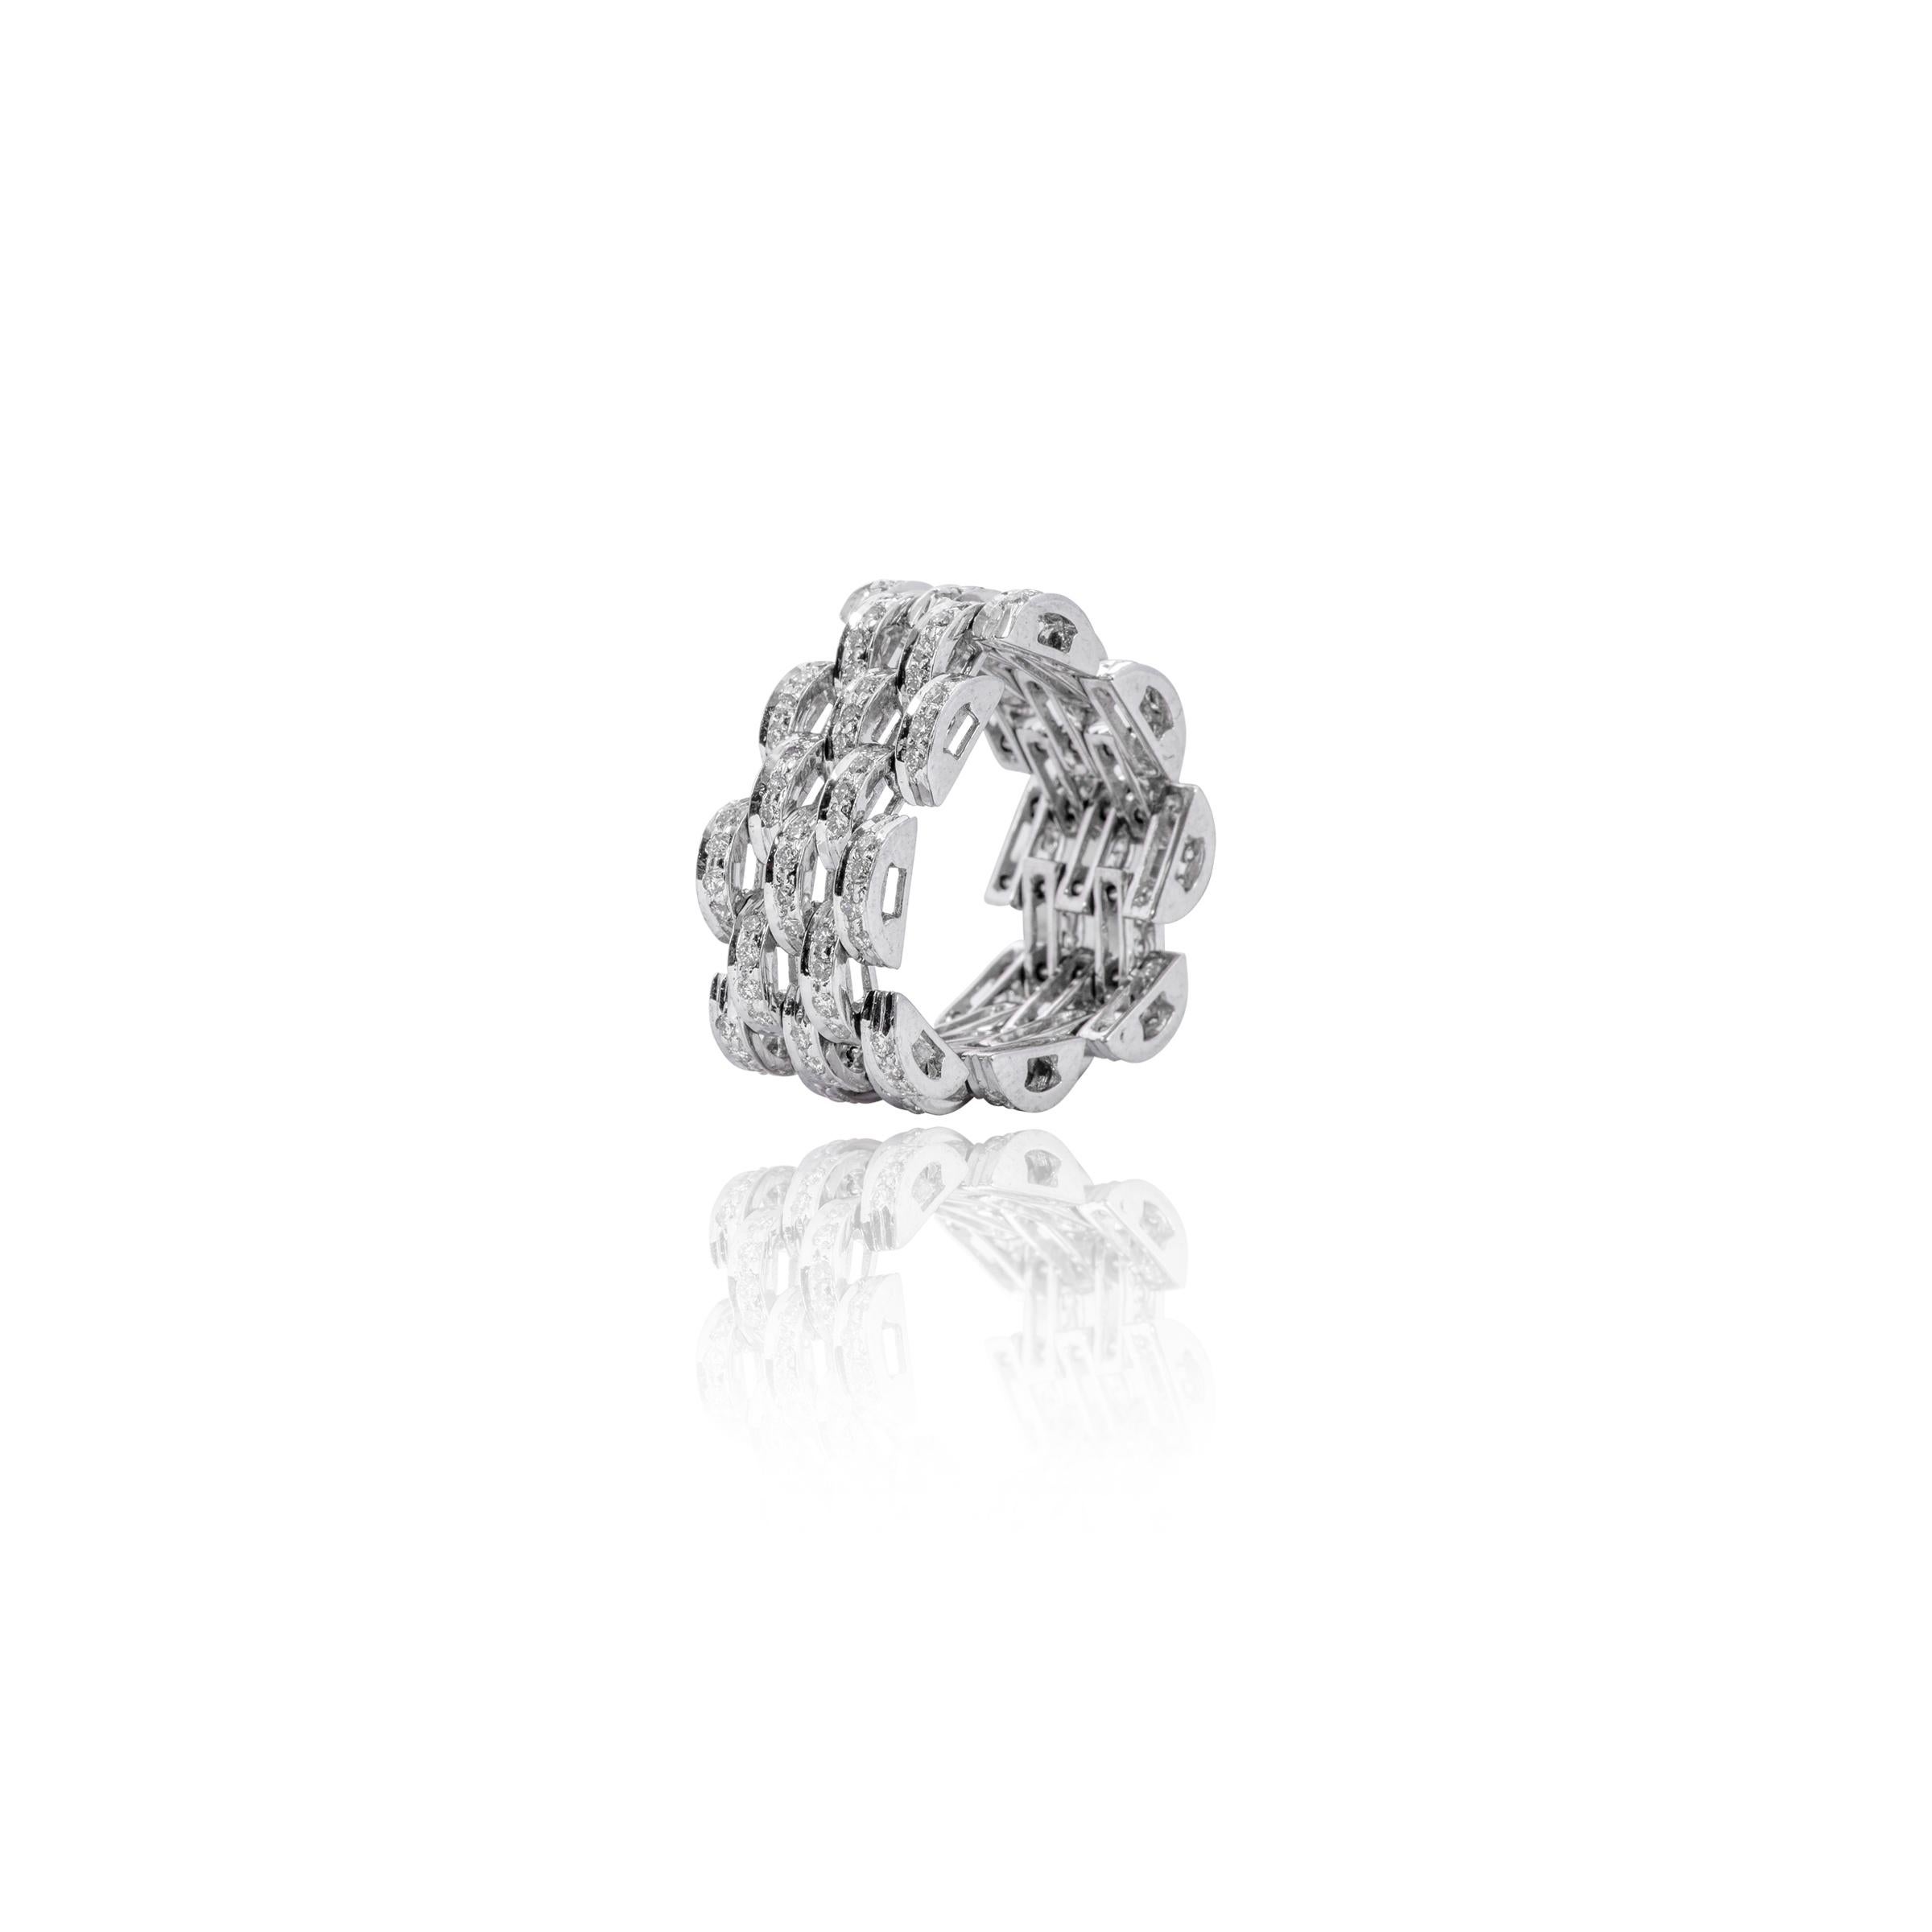 18 Karat White Gold 1.37 Carat Diamond Brilliant-Cut Eternity Link Band Ring

This sensational hump diamond round flexible link band is illuminating. The broad band with five rows of interlinked round diamond channel set humps. It’s the classic